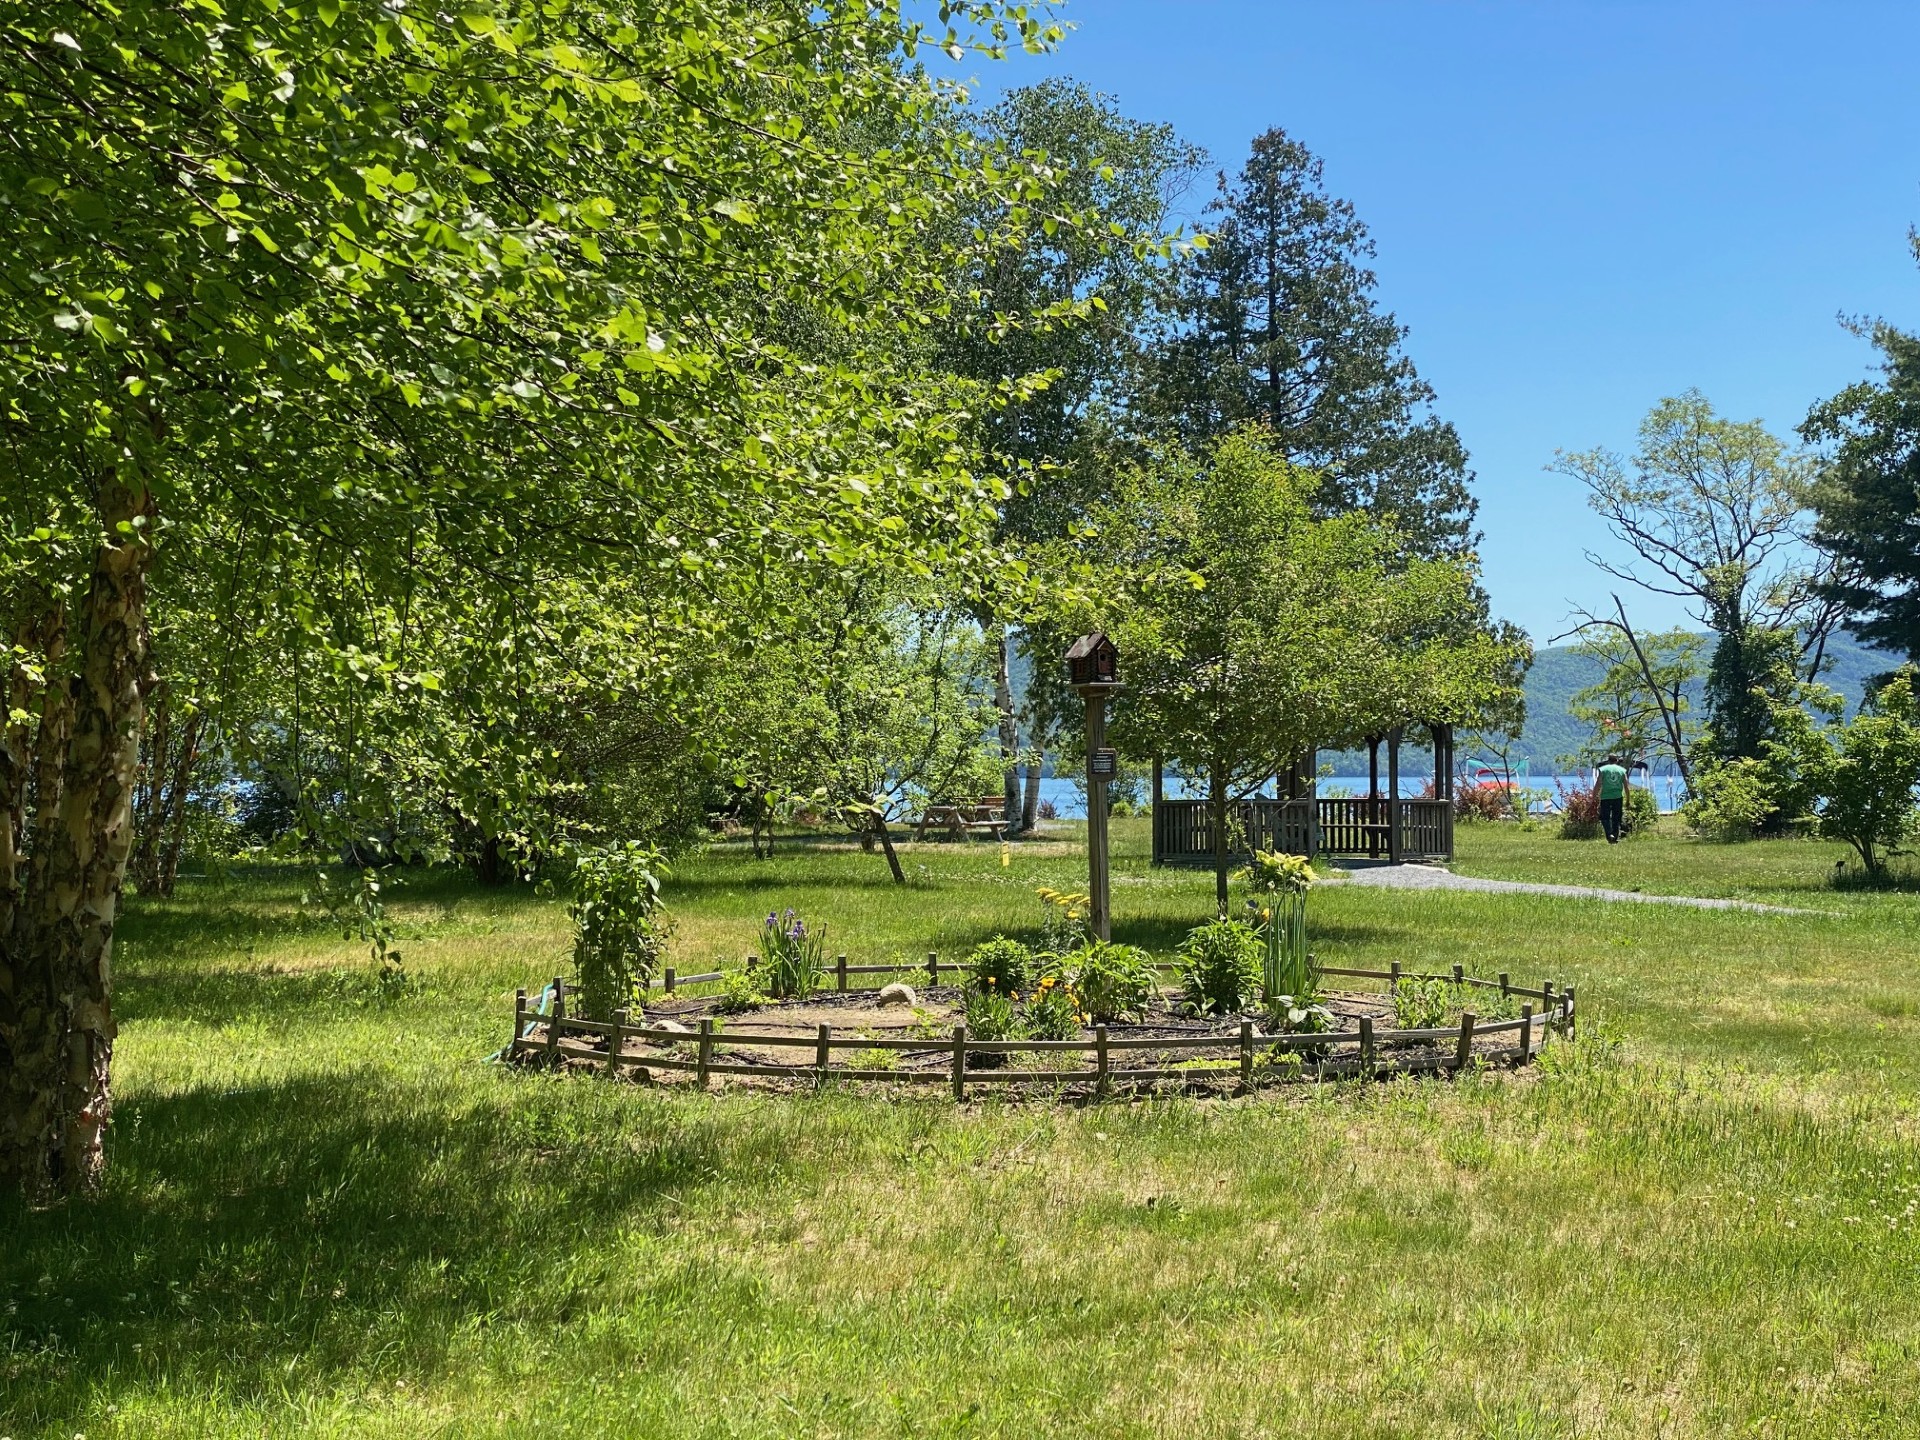 A garden and picturesque gazebo nestled amidst a park's greenery and lake in the background.